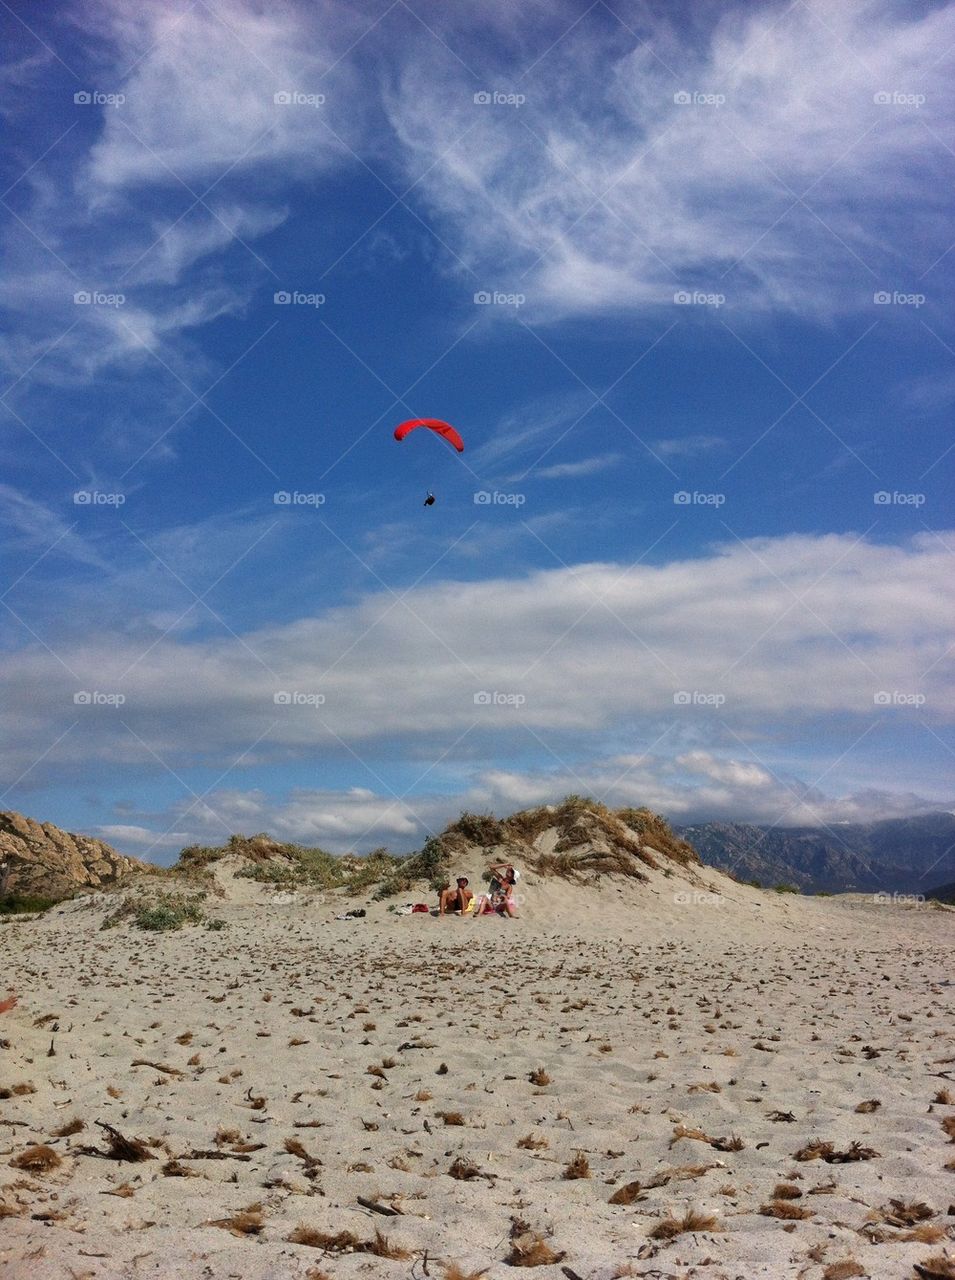 Couple on the beach looking up at paraglider